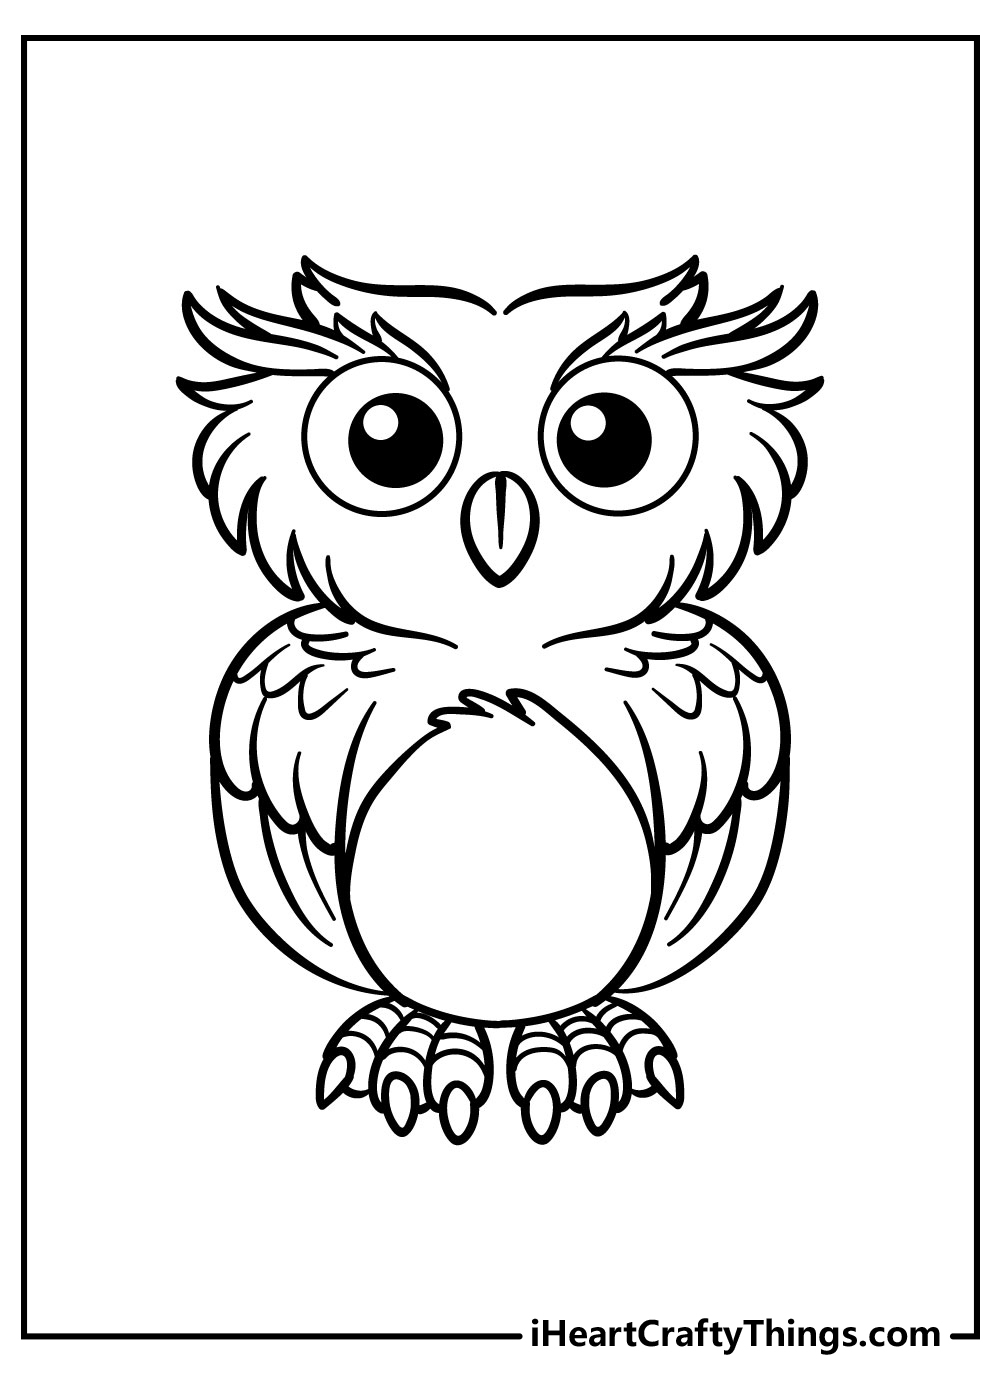 20 Wise Owl Coloring Pages Updated 20